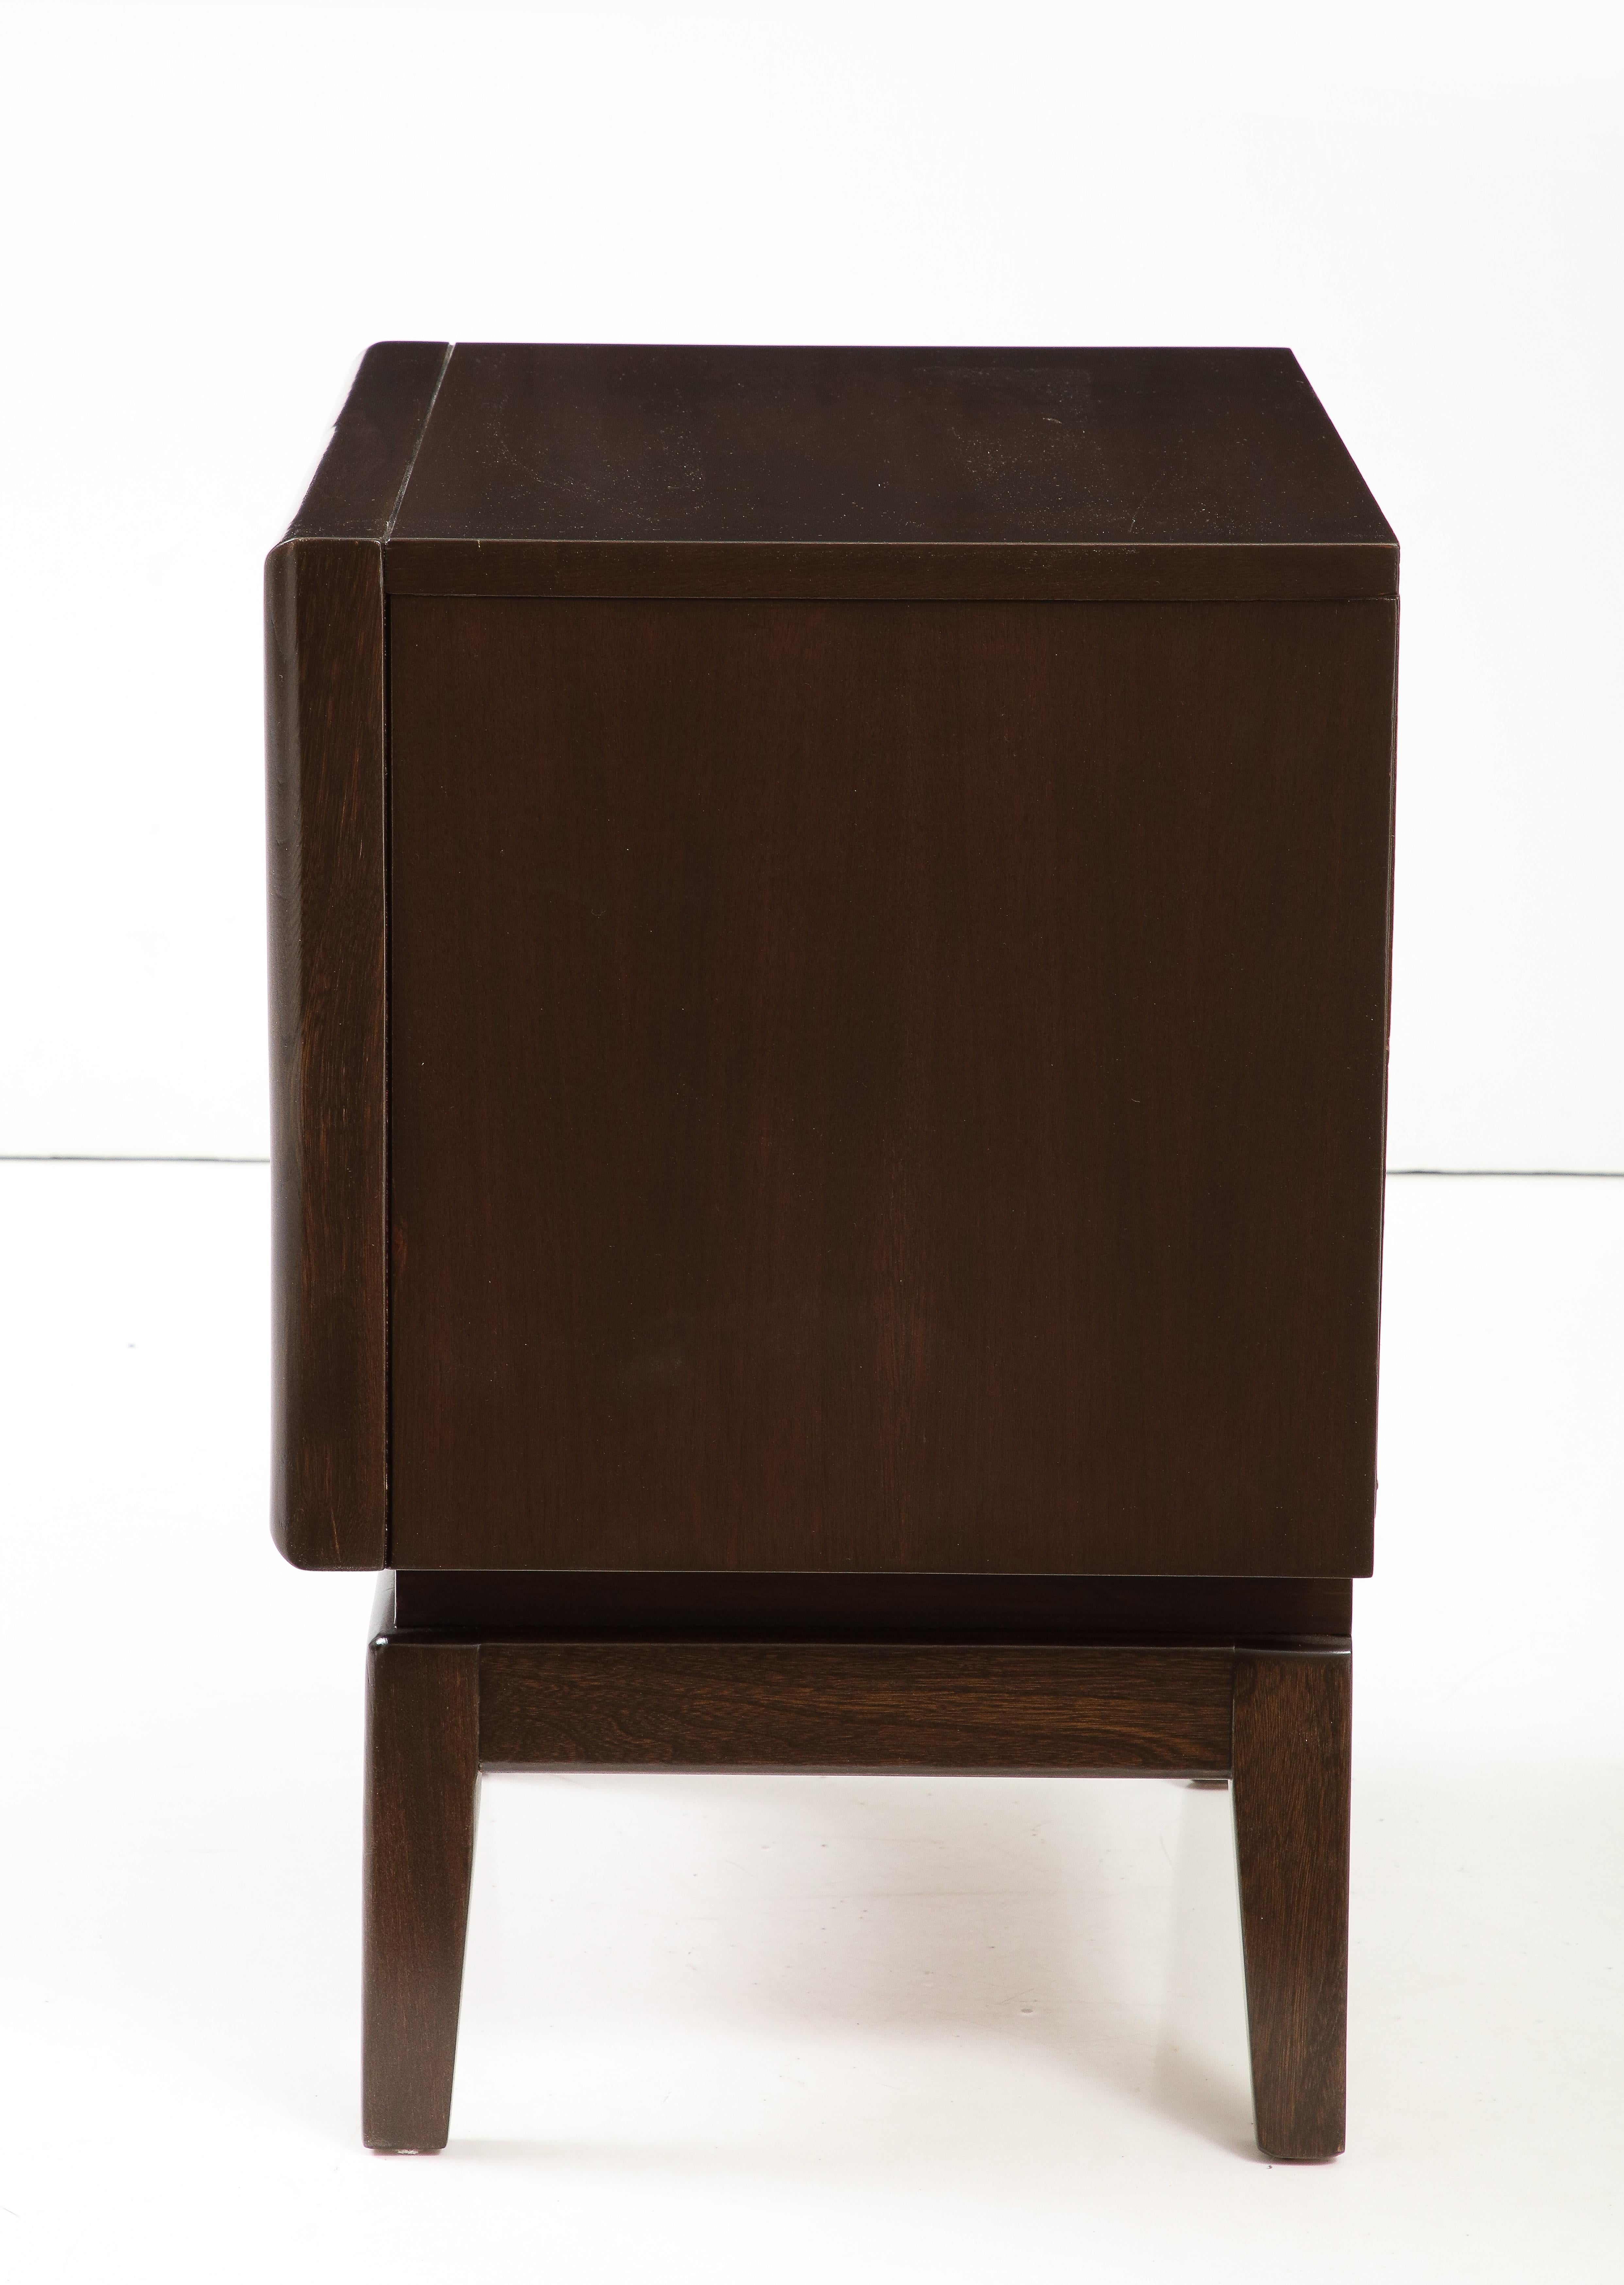 Sculptural Diamond Front Walnut Nightstands In Good Condition For Sale In New York, NY